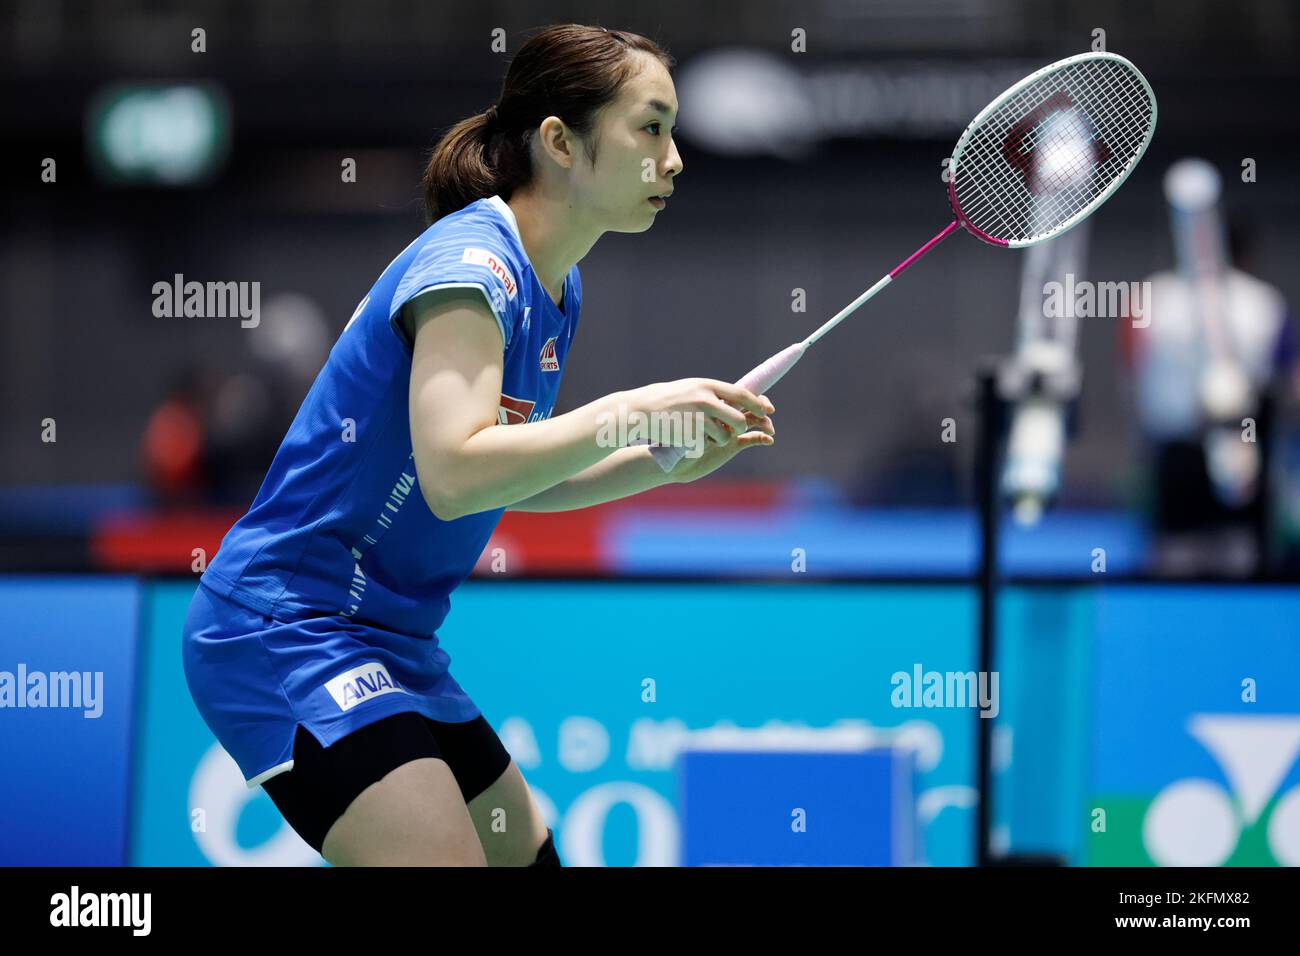 SYDNEY, AUSTRALIA - NOVEMBER 17: Misaki Matsutomo of Japan in action during the mixed doubles match between Japan and Taipei at Quaycentre on November 17, 2022 in Sydney, Australia Stock Photo